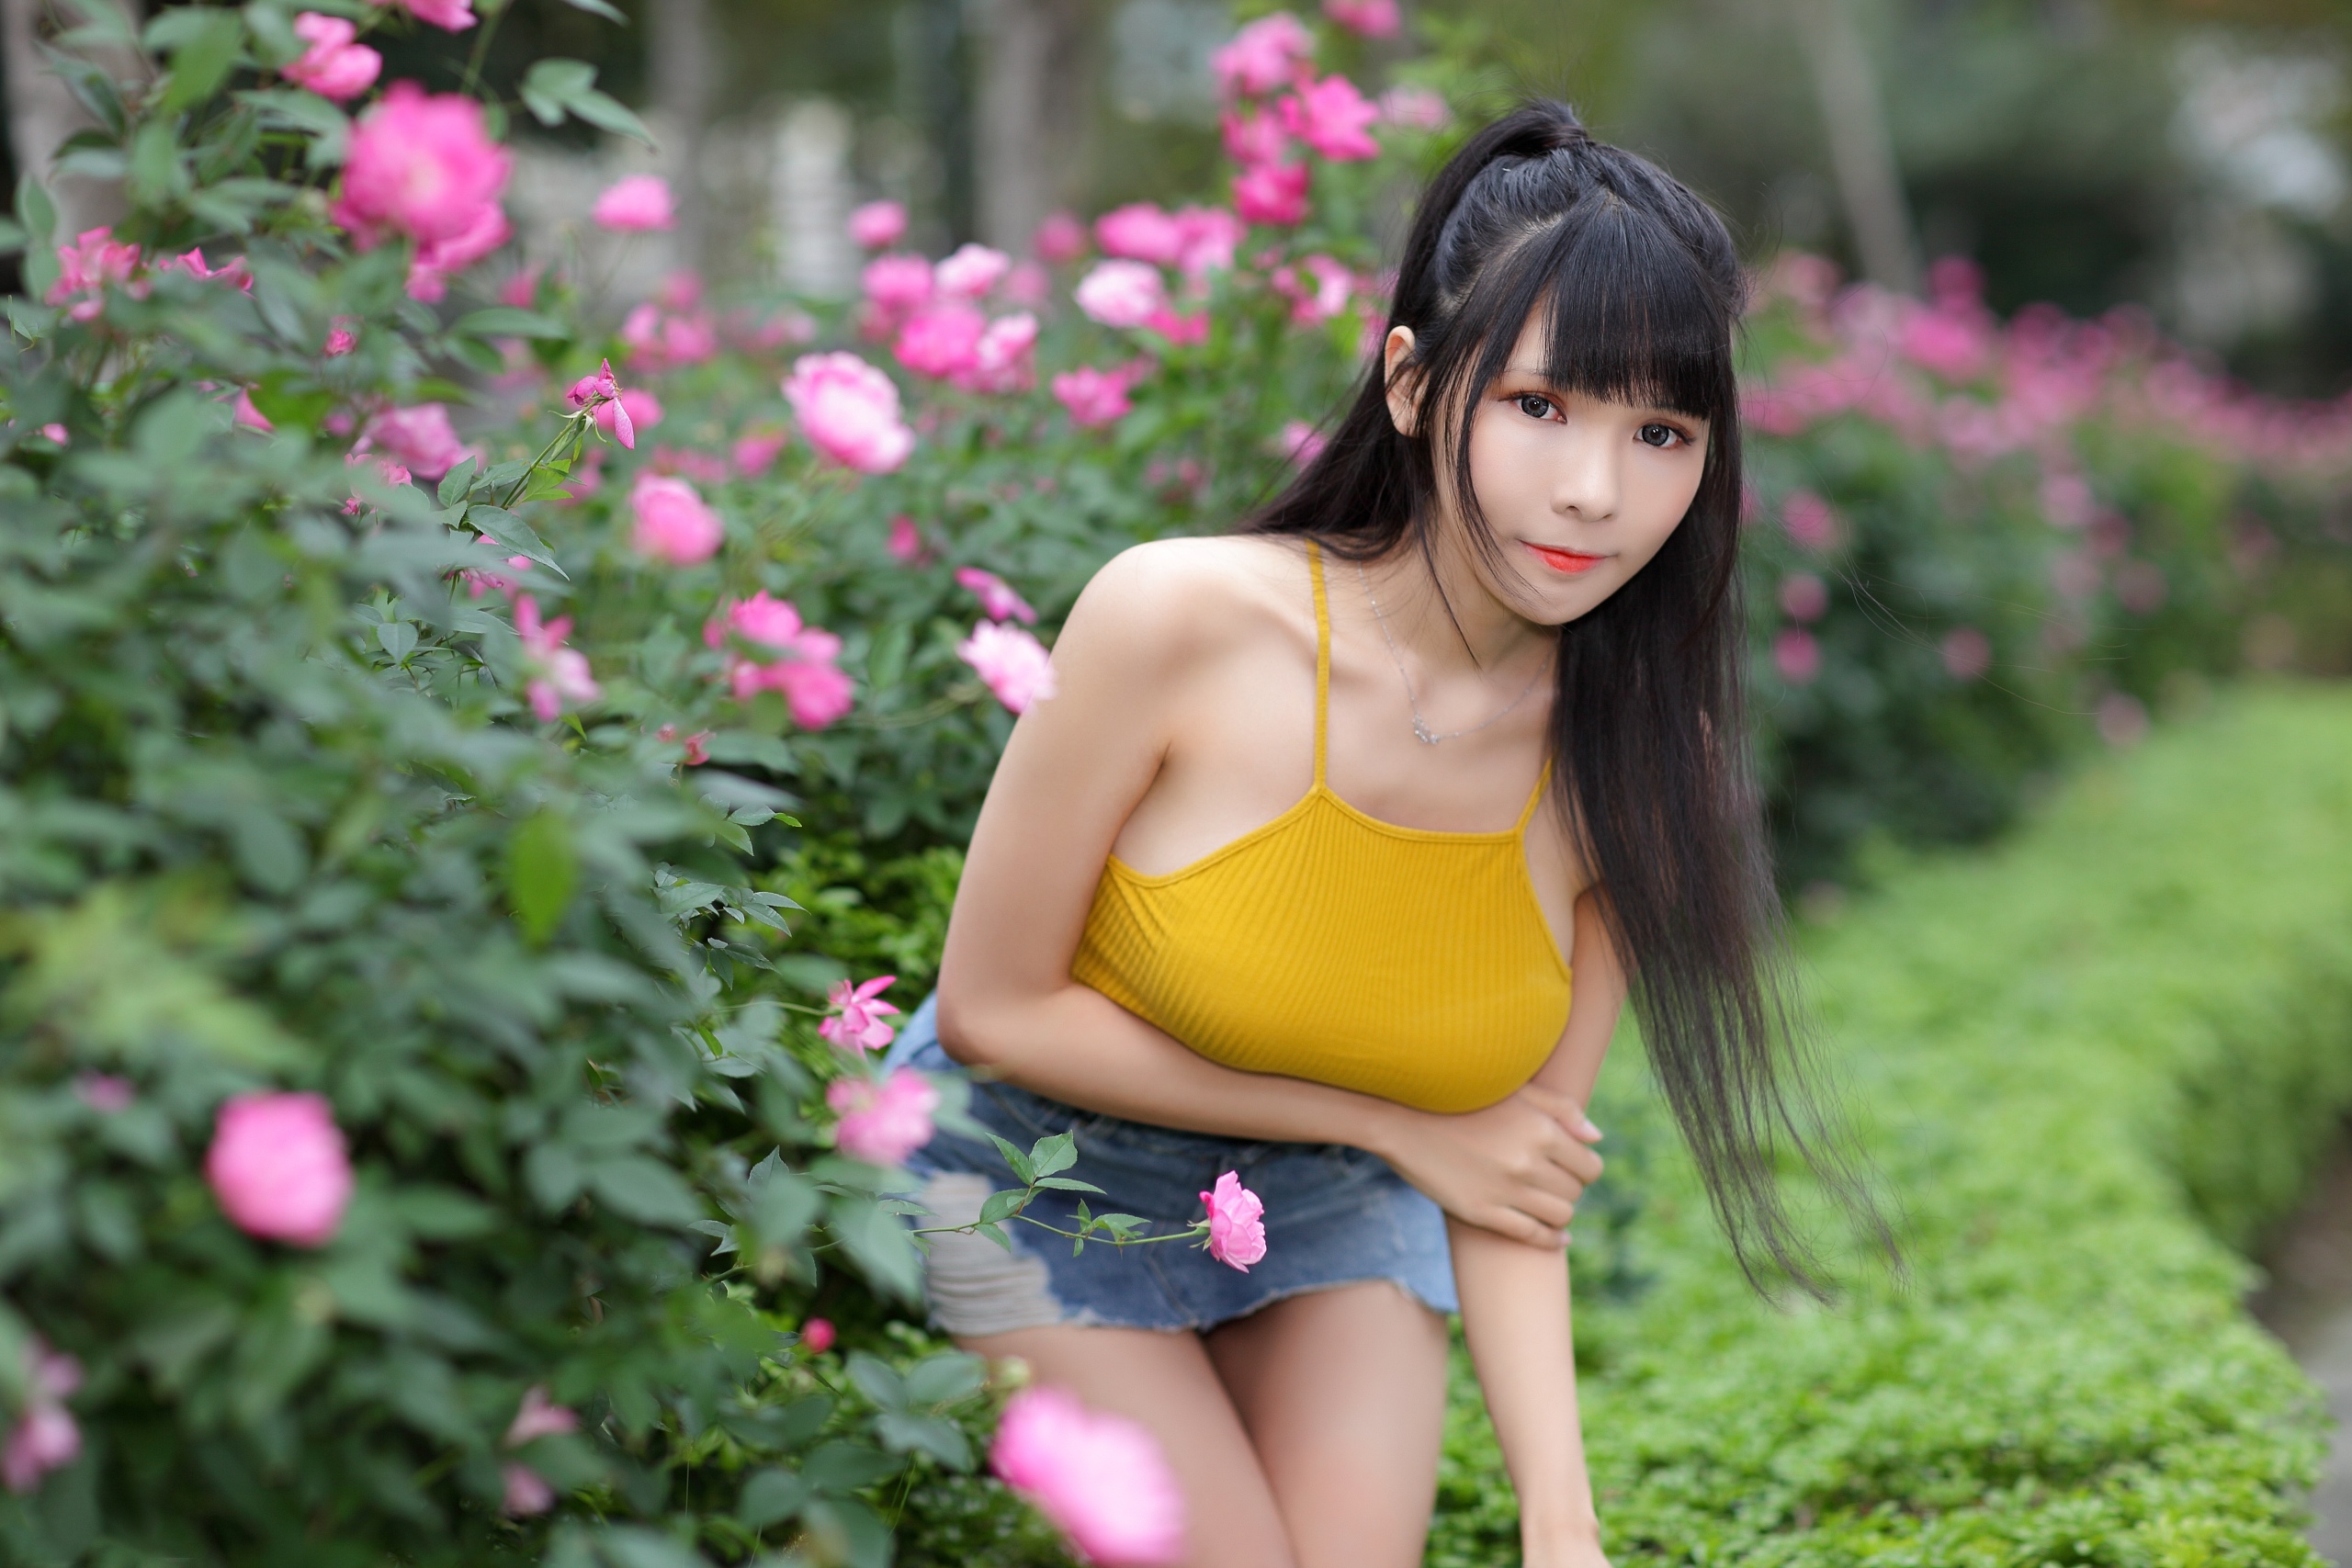 People 2560x1707 Vicky (Asian model) women model brunette Asian ponytail looking at viewer necklace yellow tops miniskirt bushes flowers depth of field outdoors women outdoors Taiwanese women holding boobs